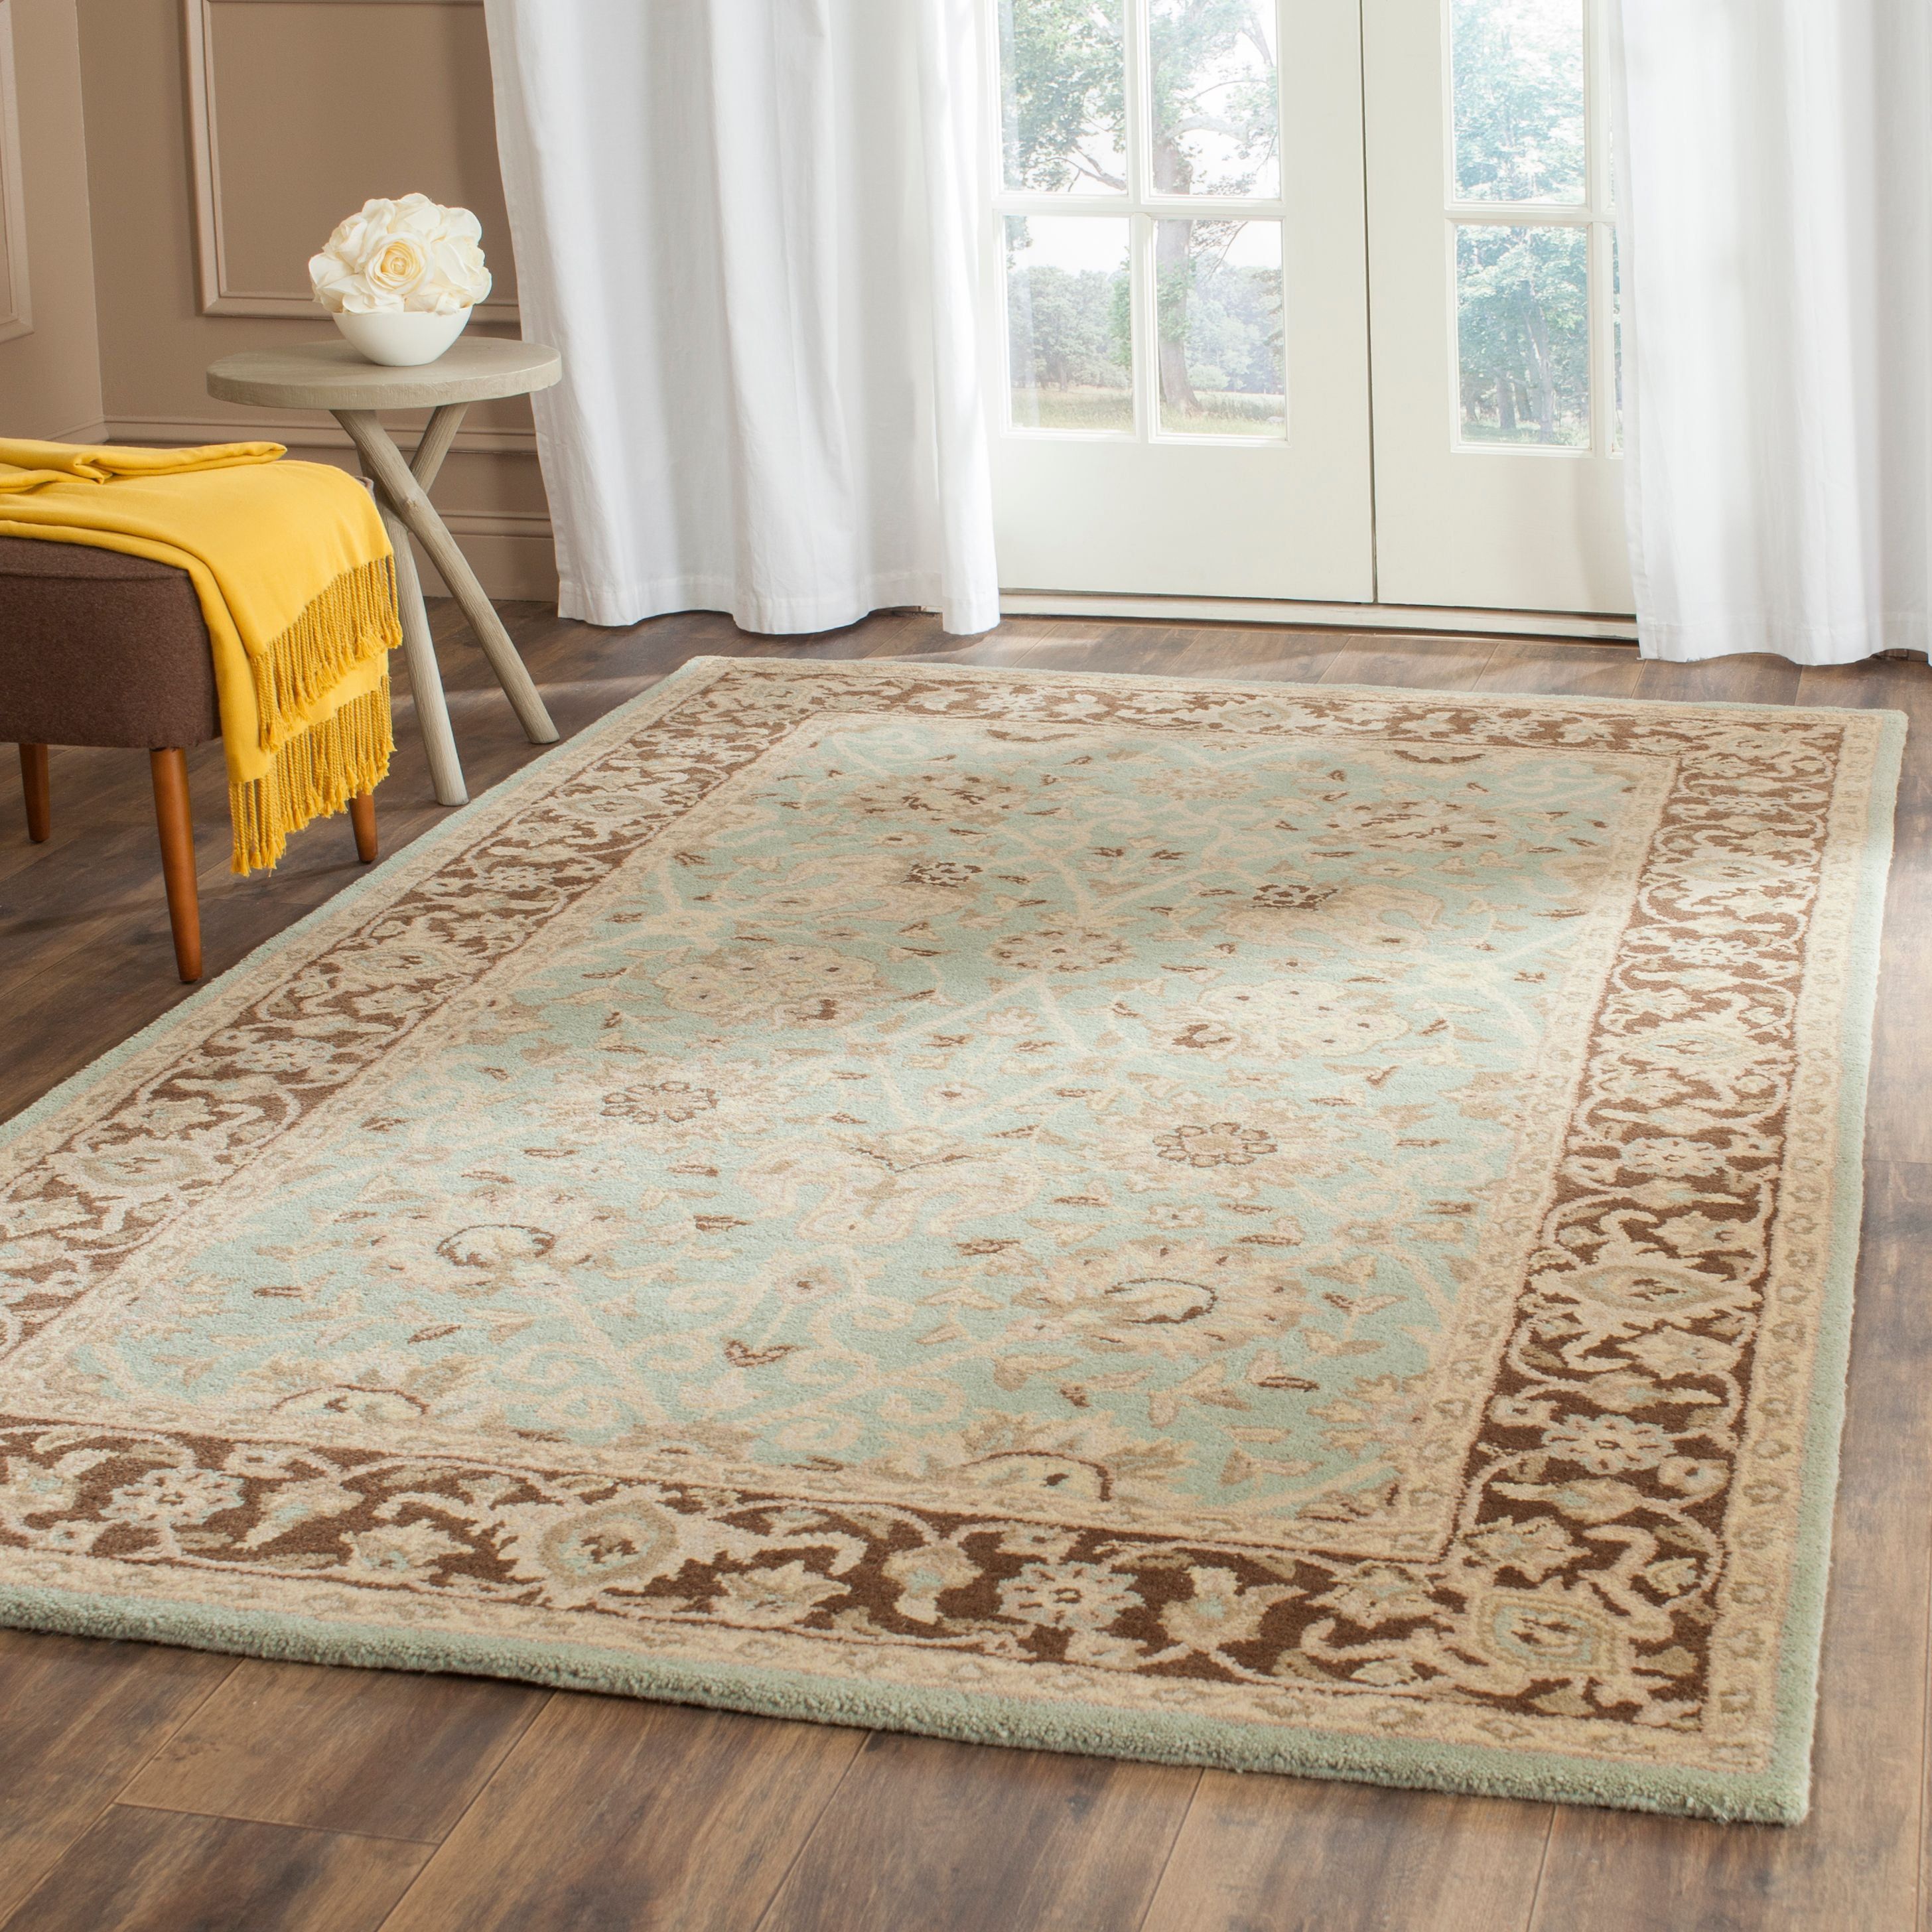 Elegant Heirloom Green and Brown Hand-Tufted Wool Area Rug, 8'3" x 11'